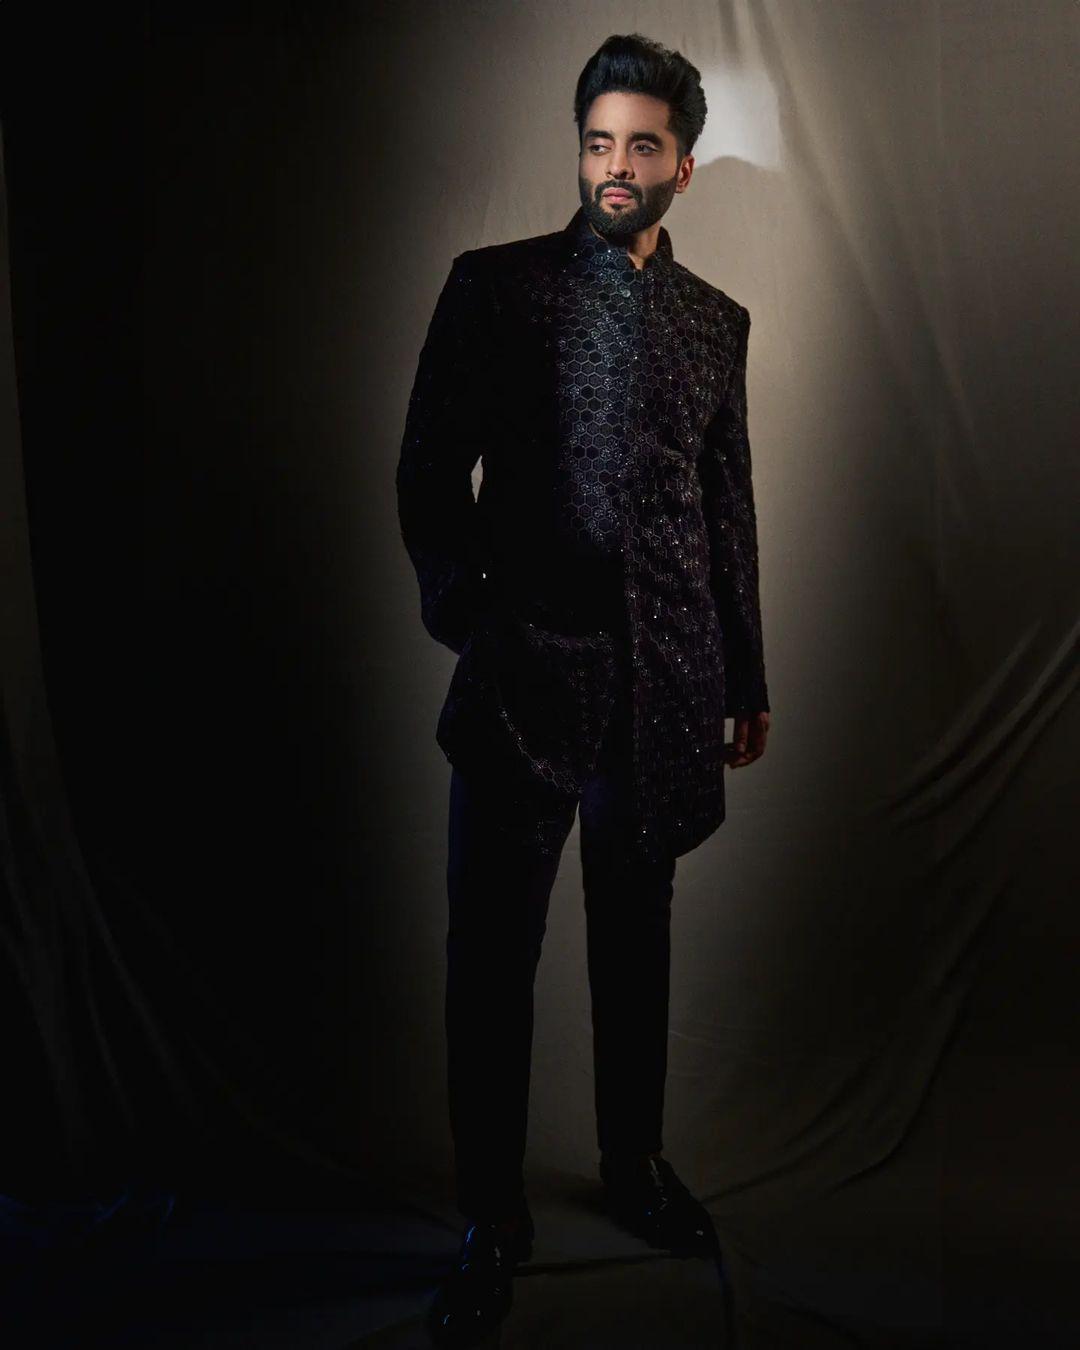 For a friend's reception party, Jackky chose an all-black outfit, including a classic sherwani. Paired with stylish shiny black shoes, this look is sophisticated and on point